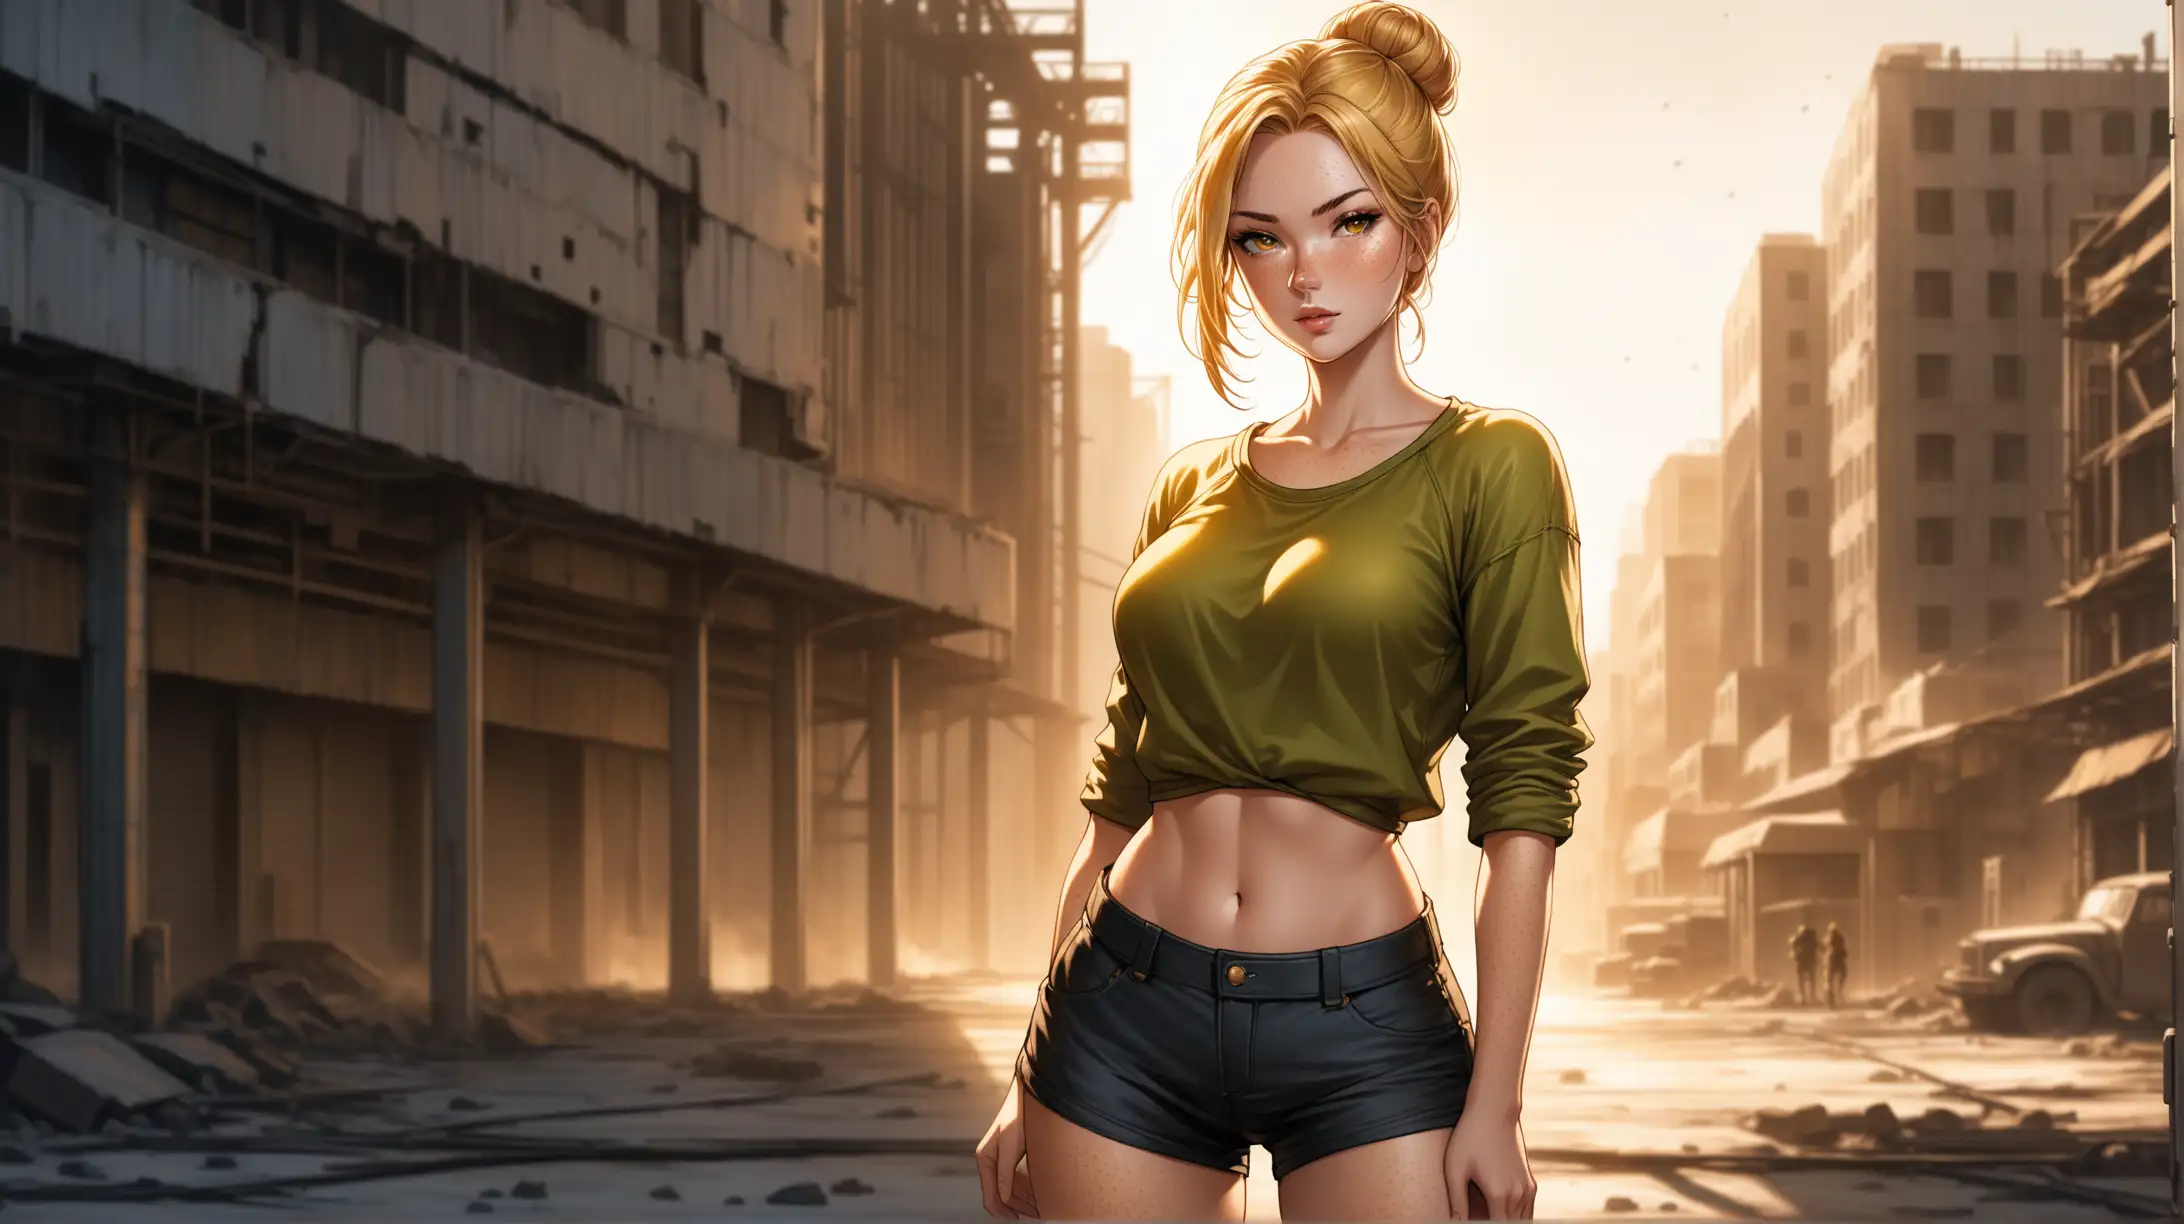 Blonde Woman in FalloutInspired Attire Poses Seductively in Urban Outdoors